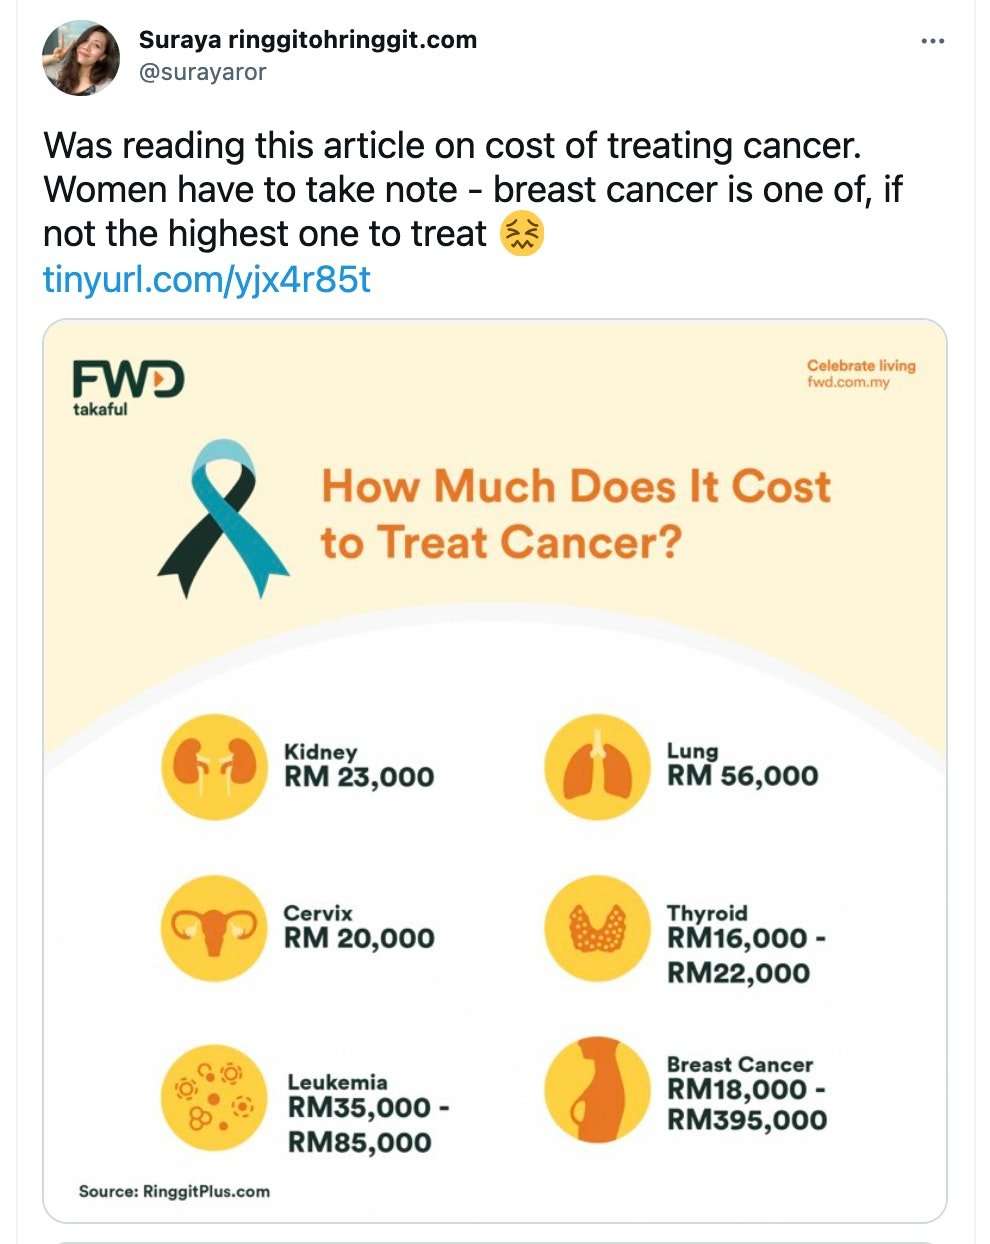 âï¸? How much does it cost to treat cancer?